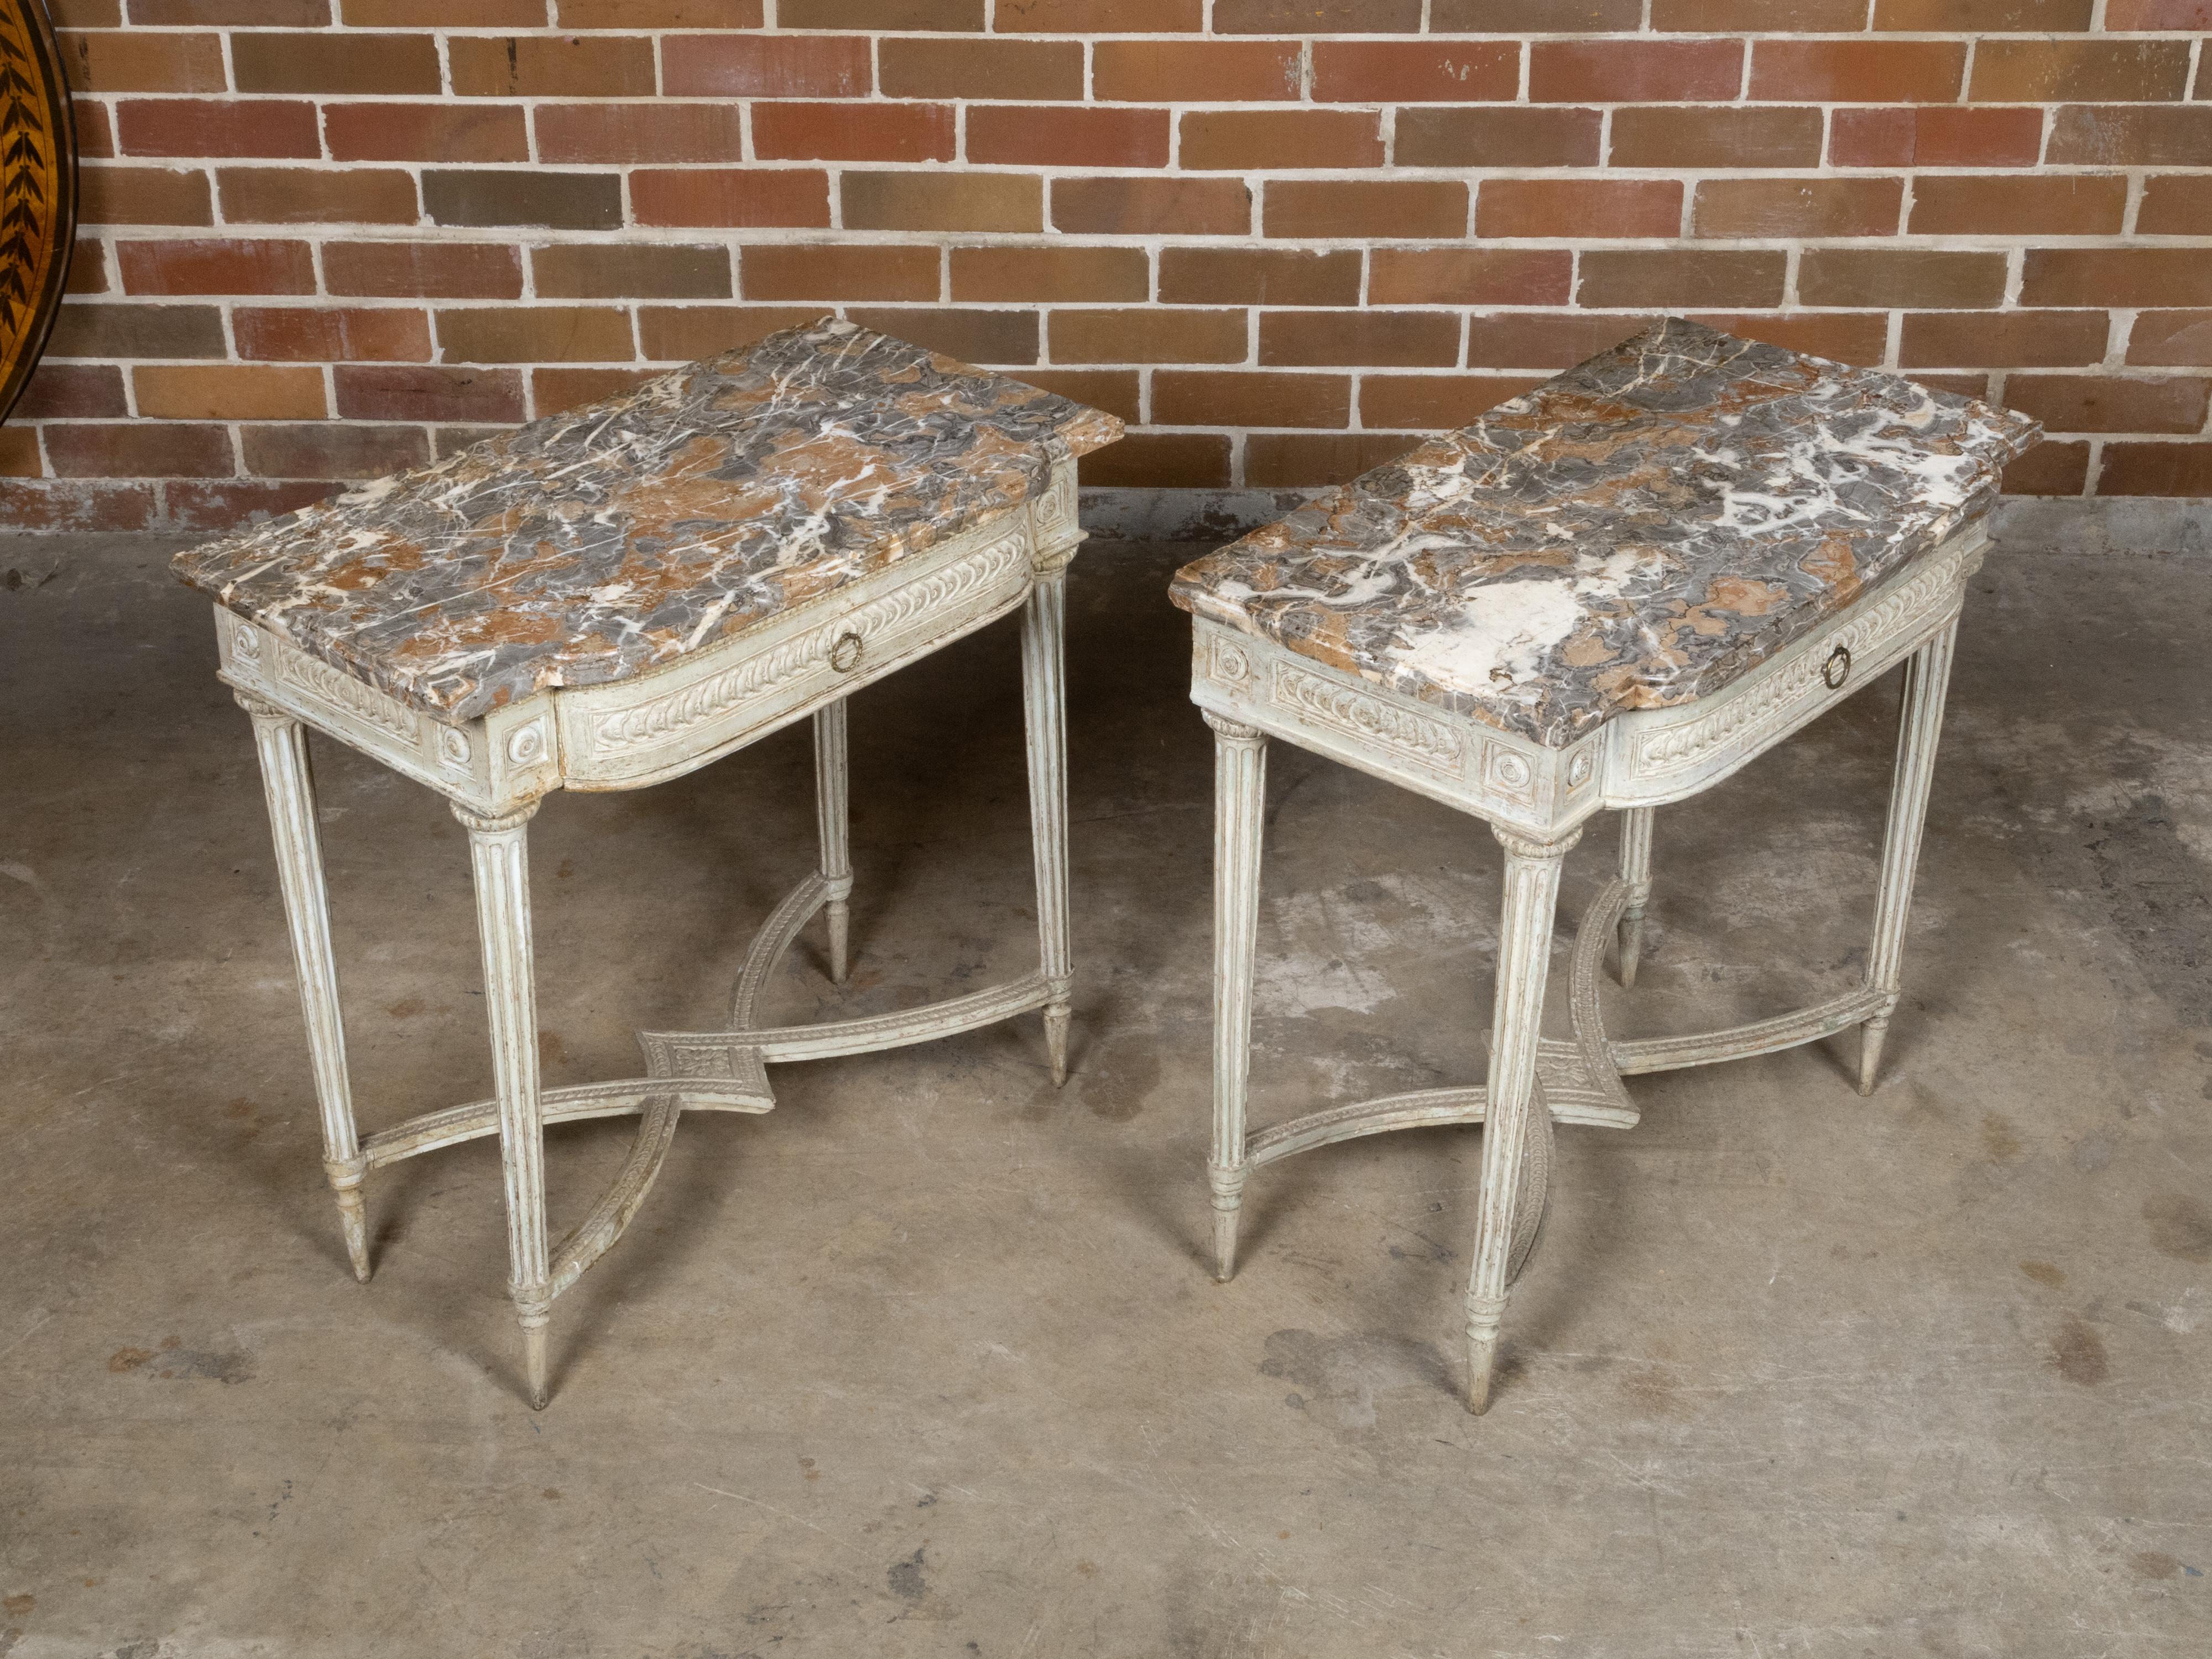 Pair of French Louis XVI 18th Century Painted Console Tables with Marble Tops For Sale 1